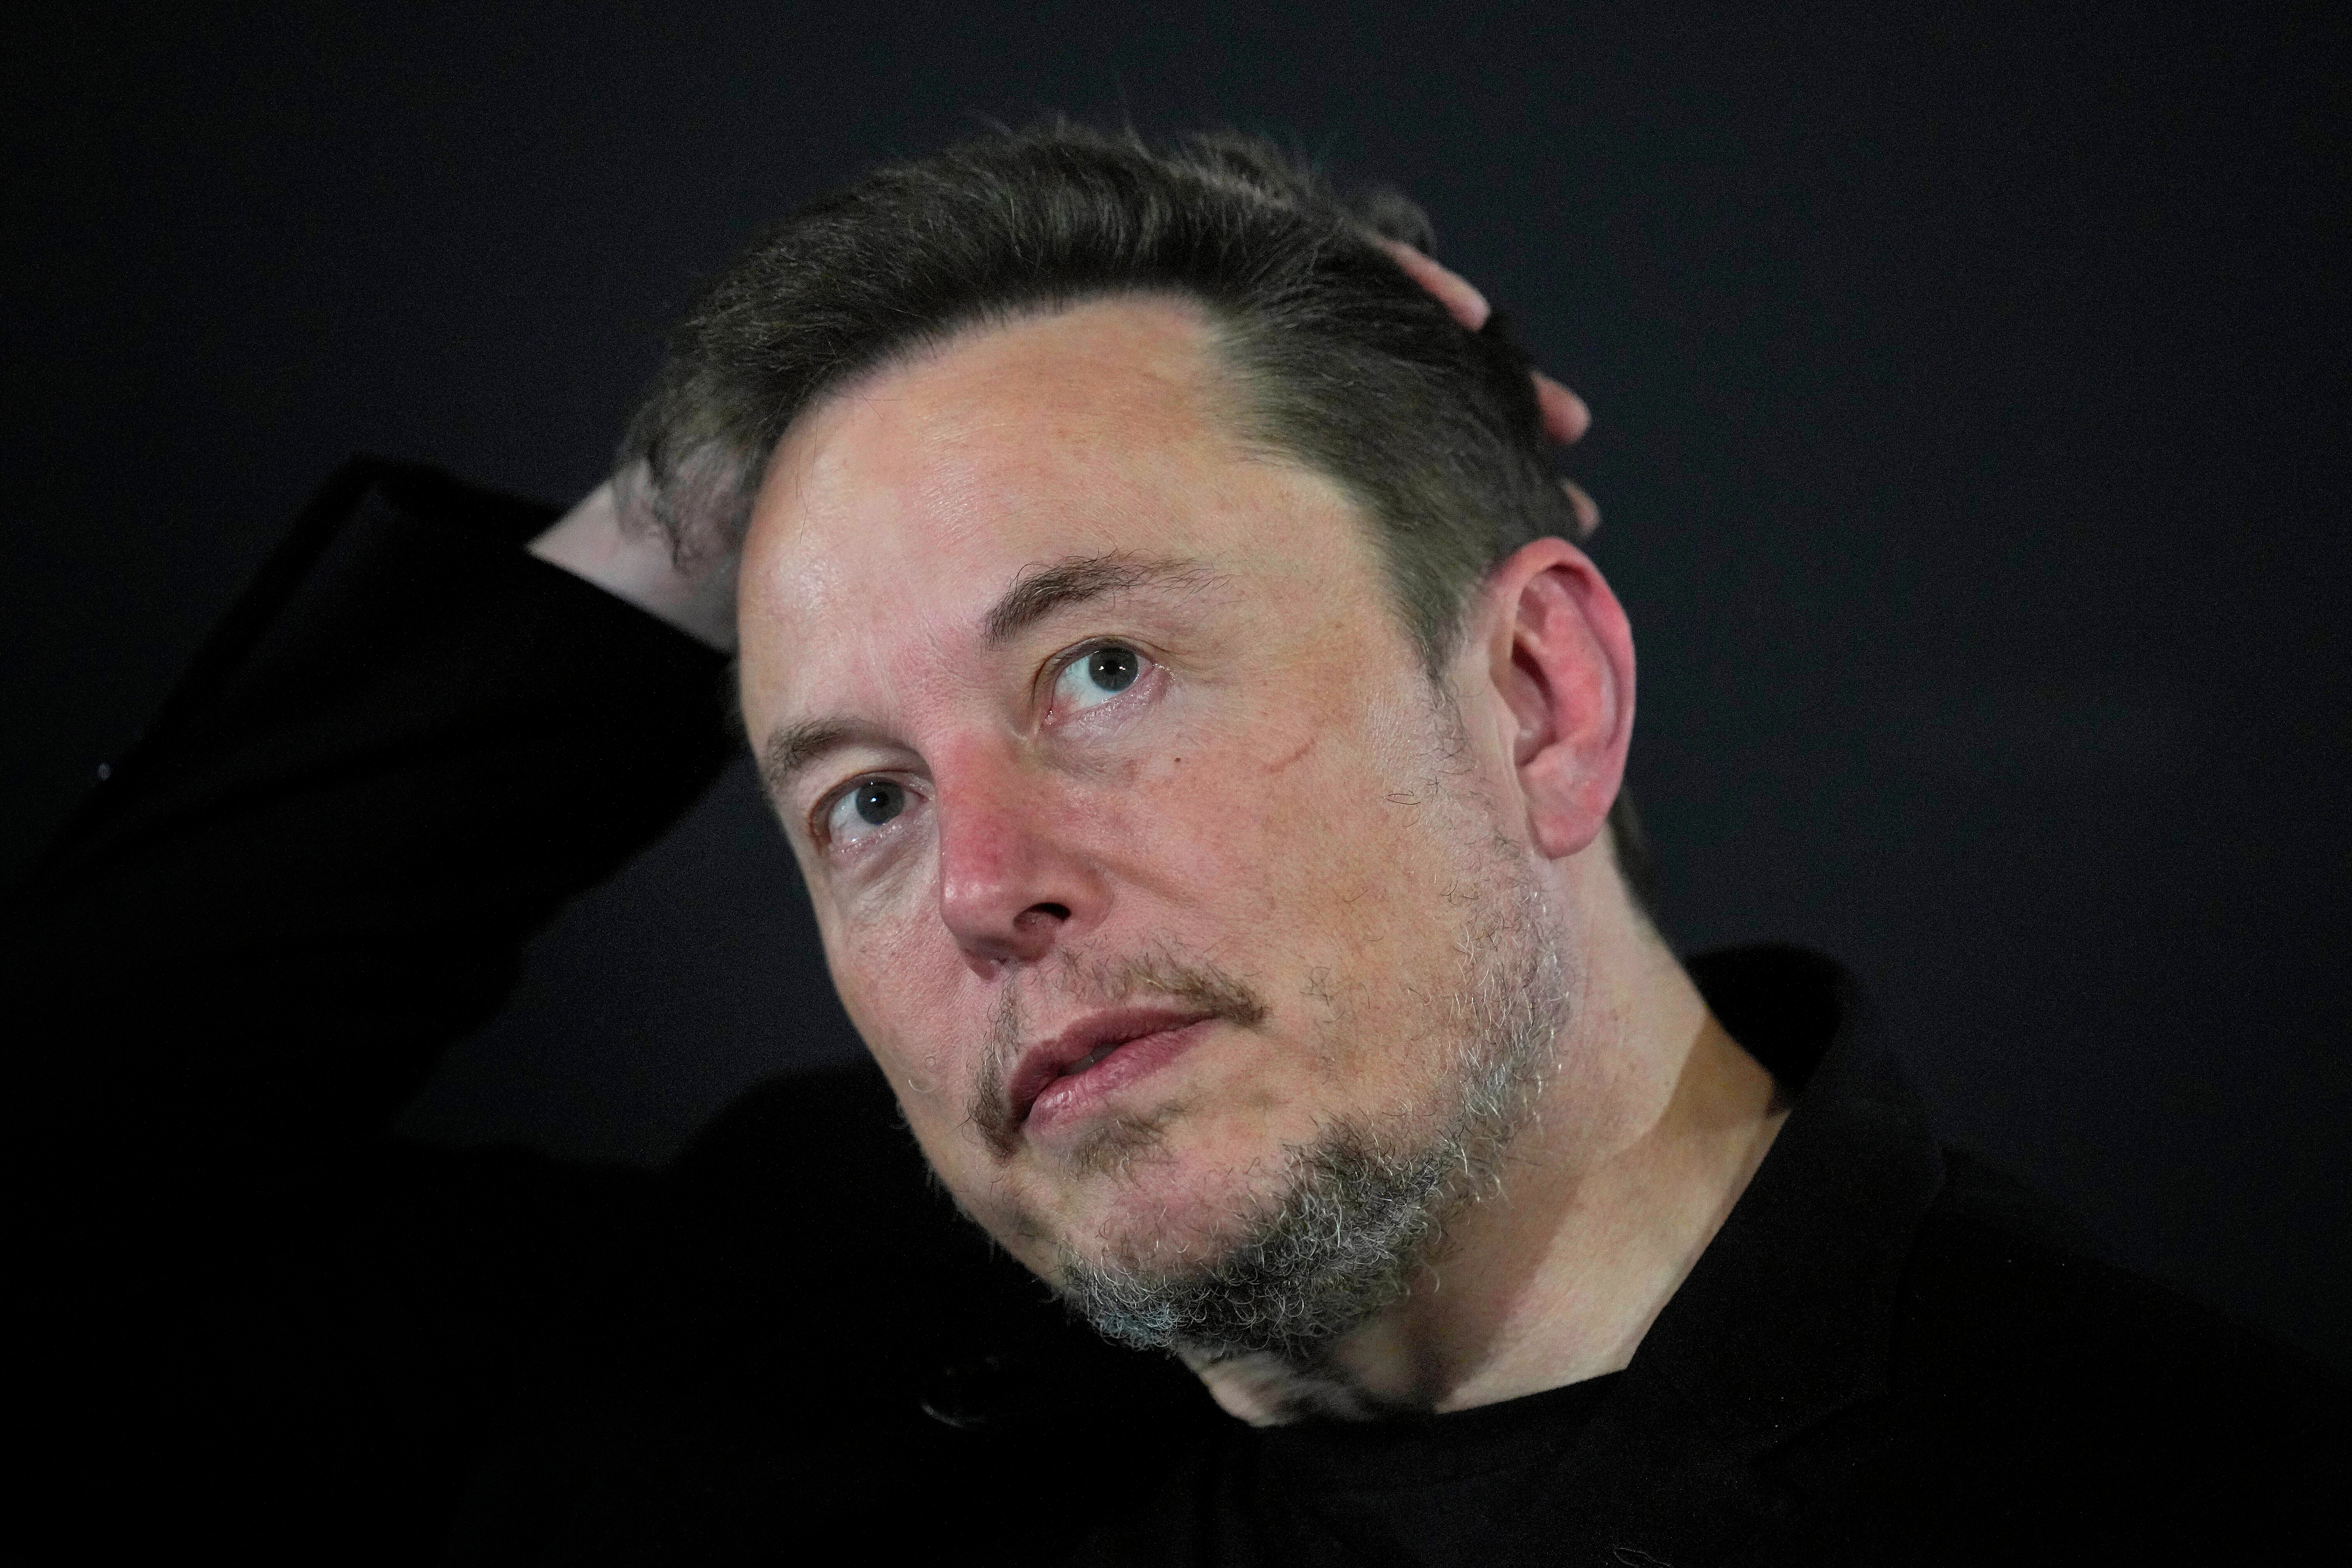 Elon Musk has restored the X account of conspiracy theorist Alex Jones after posting a pol on the social media platform formerly known as Twitter